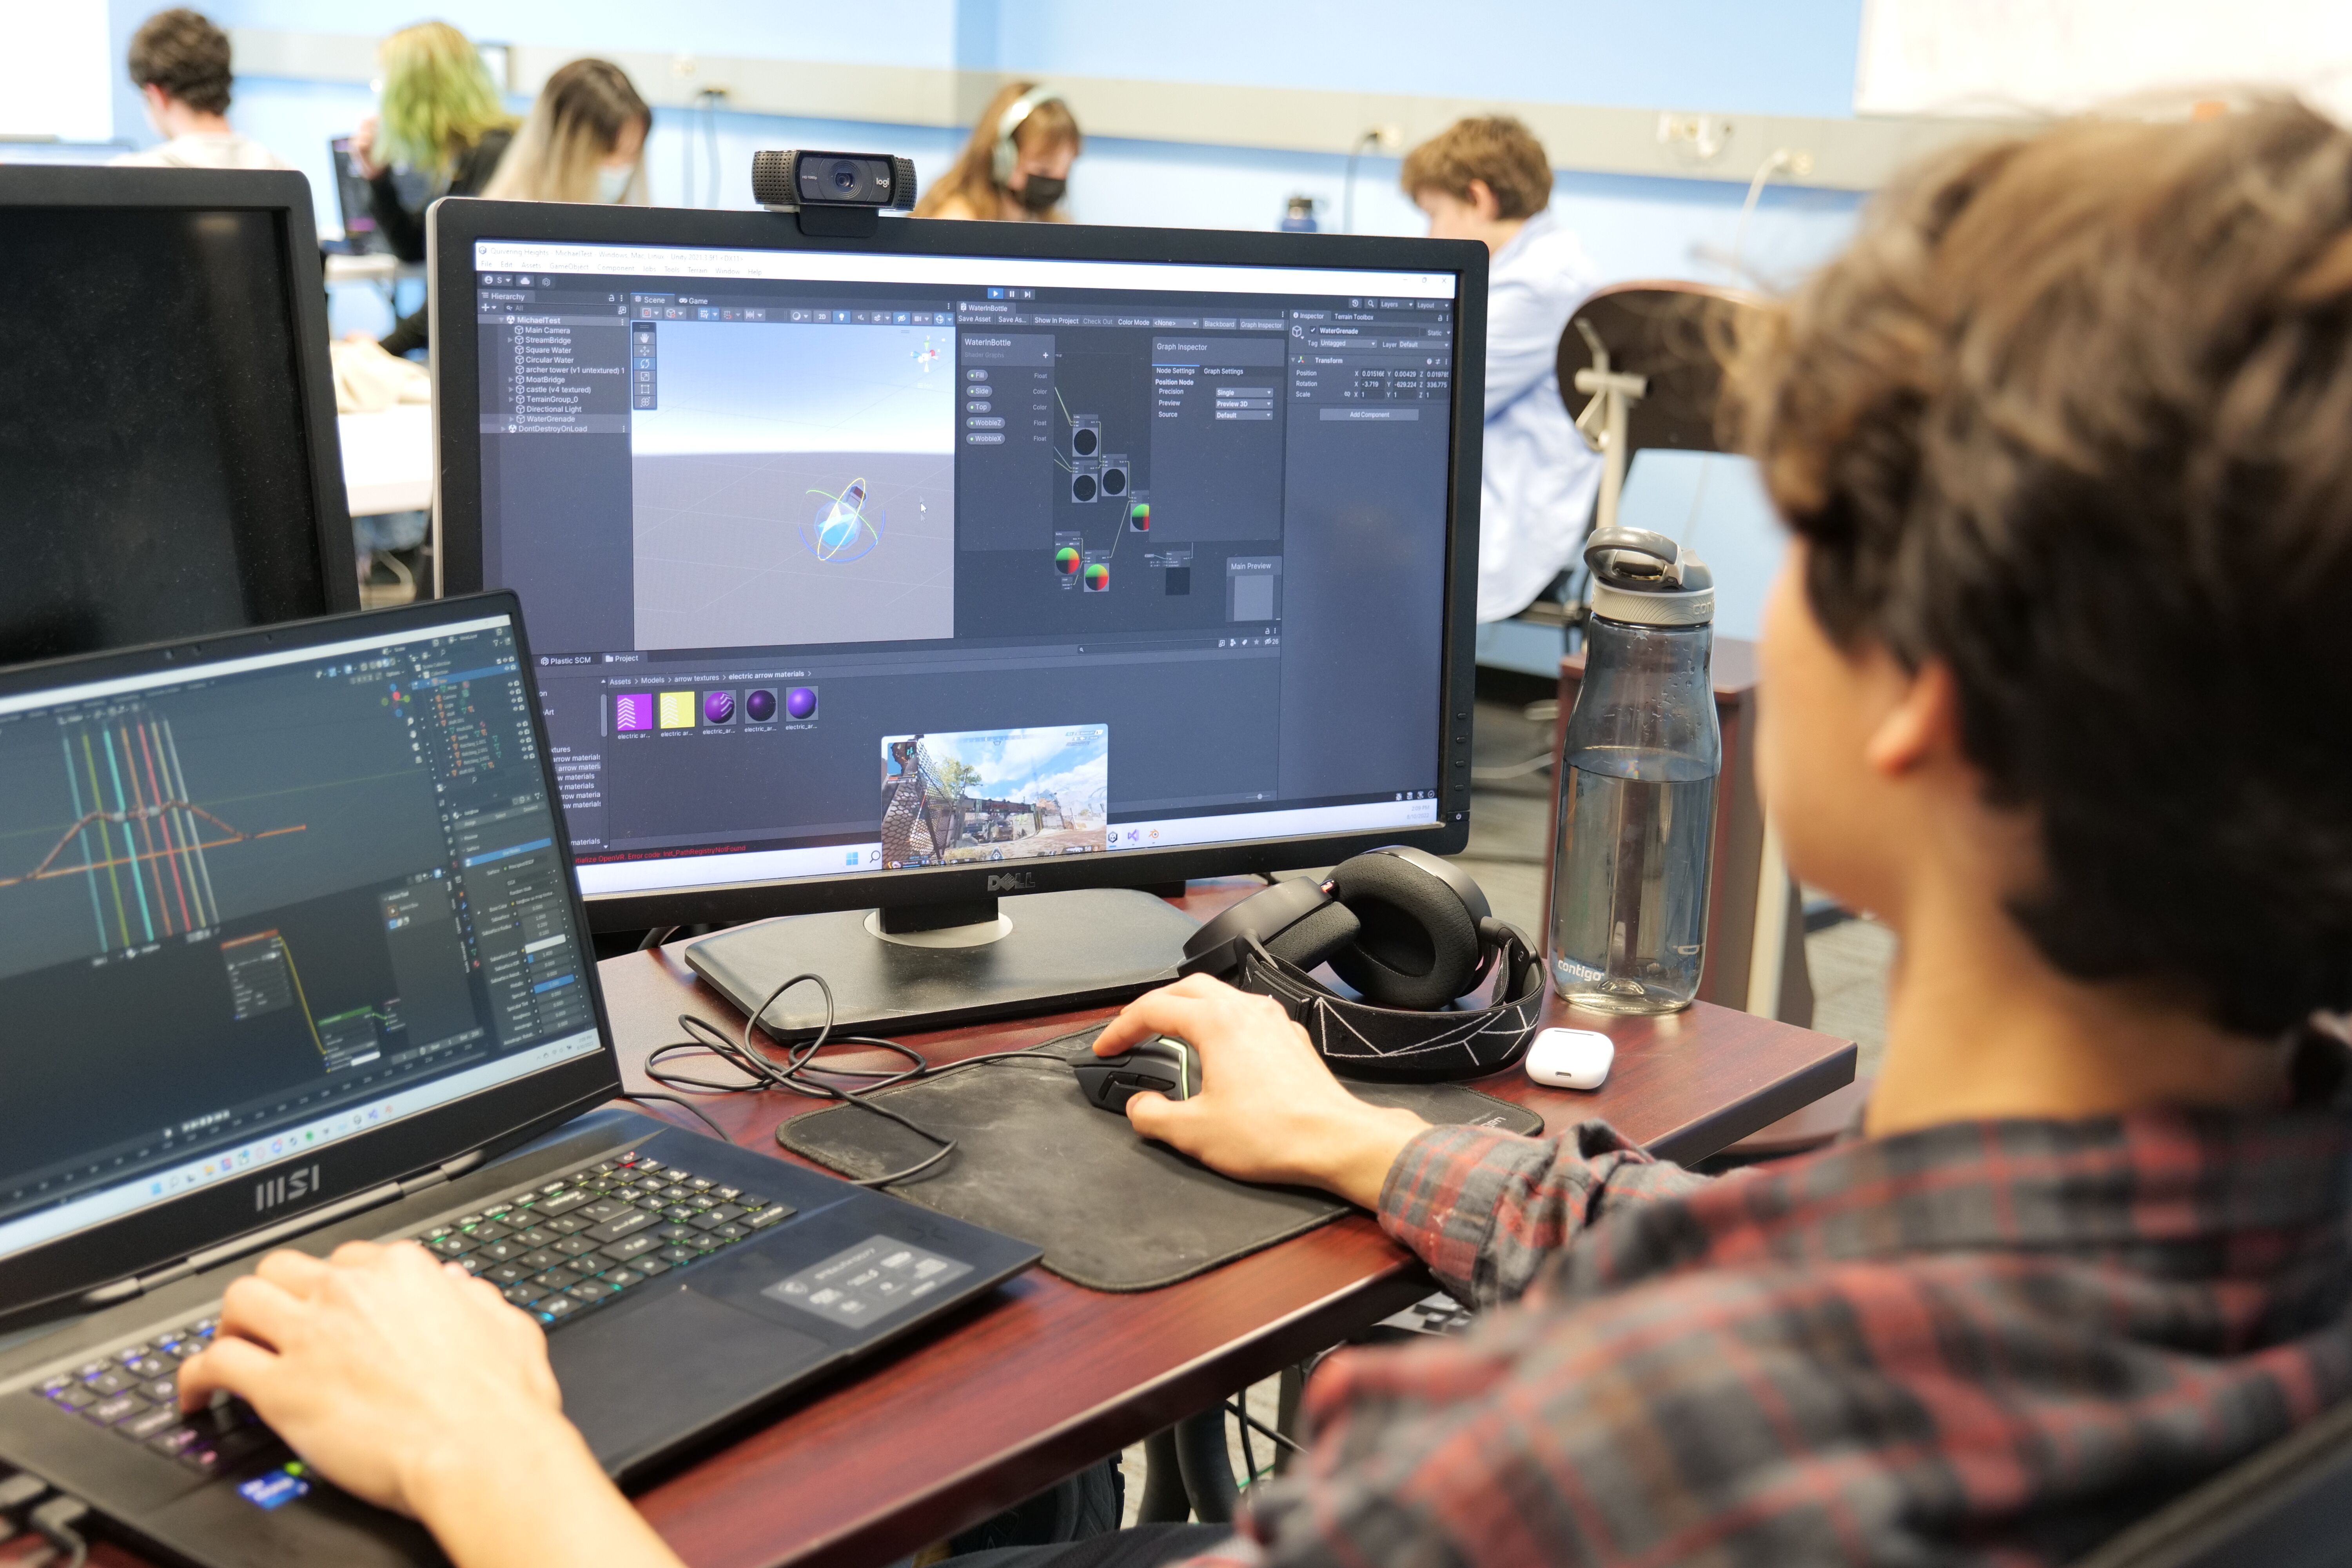 Get Hands-On Experience Creating 2D & 3D Games With This Online School